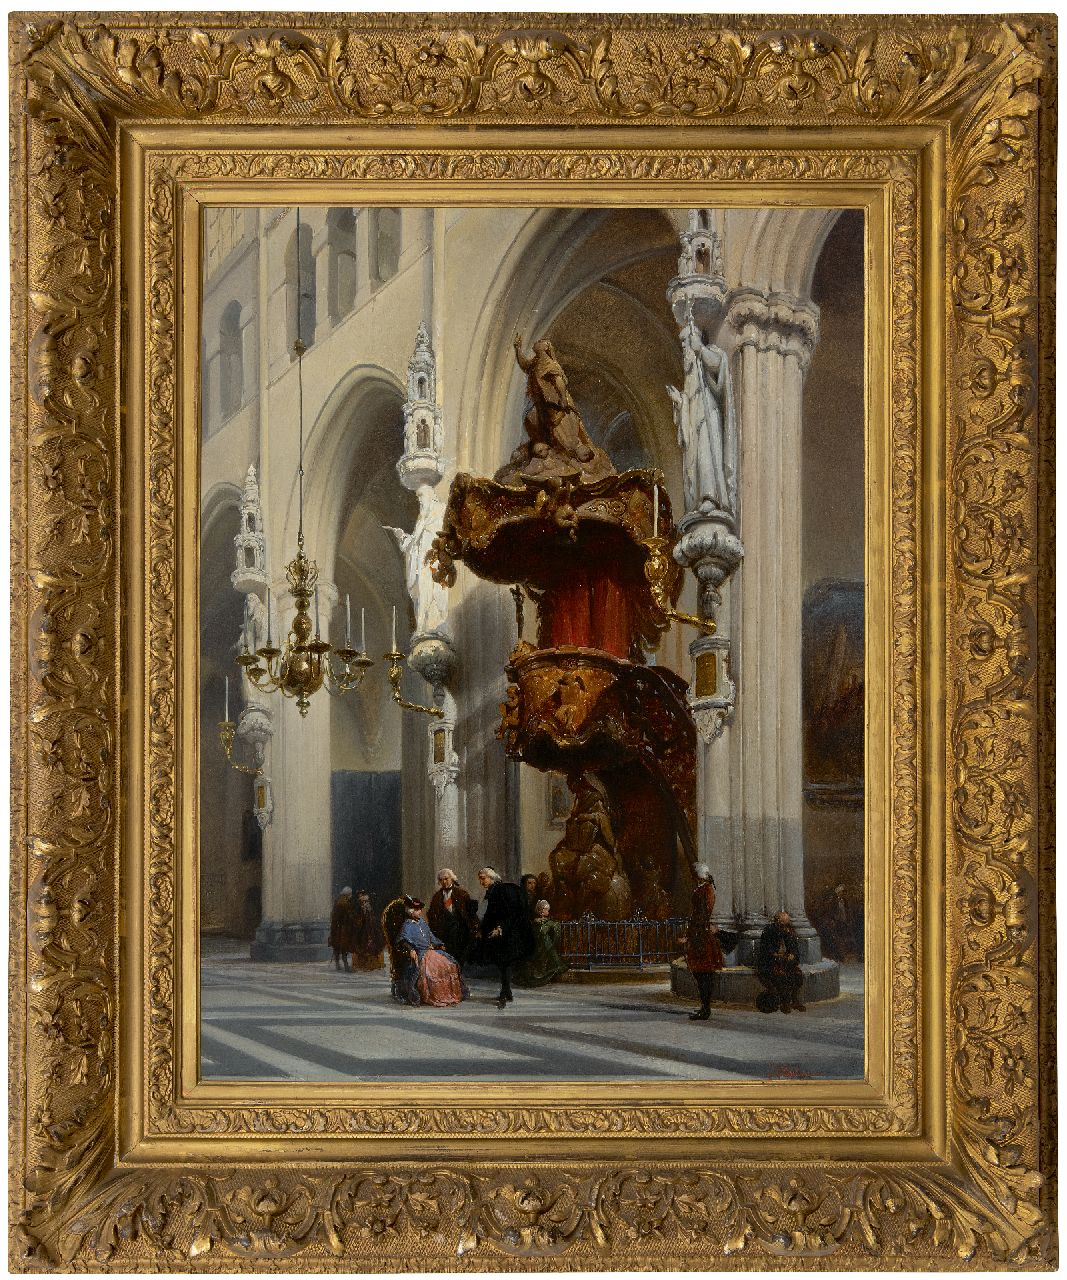 Bosboom J.  | Johannes Bosboom | Paintings offered for sale | Interior of the Onze Lieve Vrouwe church in Bruges, oil on panel 67.9 x 51.8 cm, signed l.r.